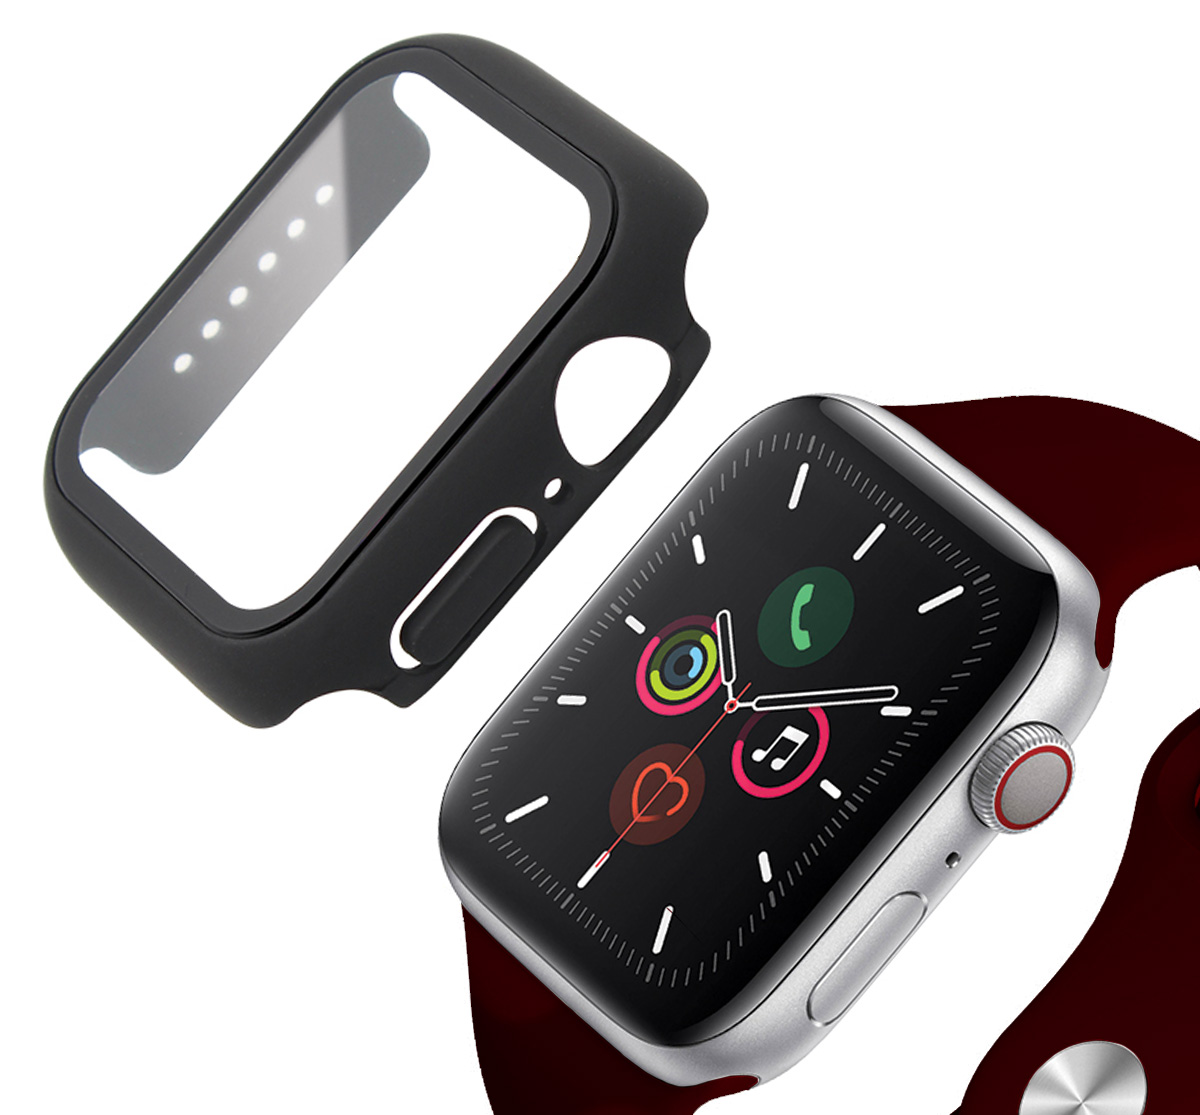 Full Coverage Tempered Glass Bumper with Black Edges for Apple Watch Series 4/5/6/SE (40mm)